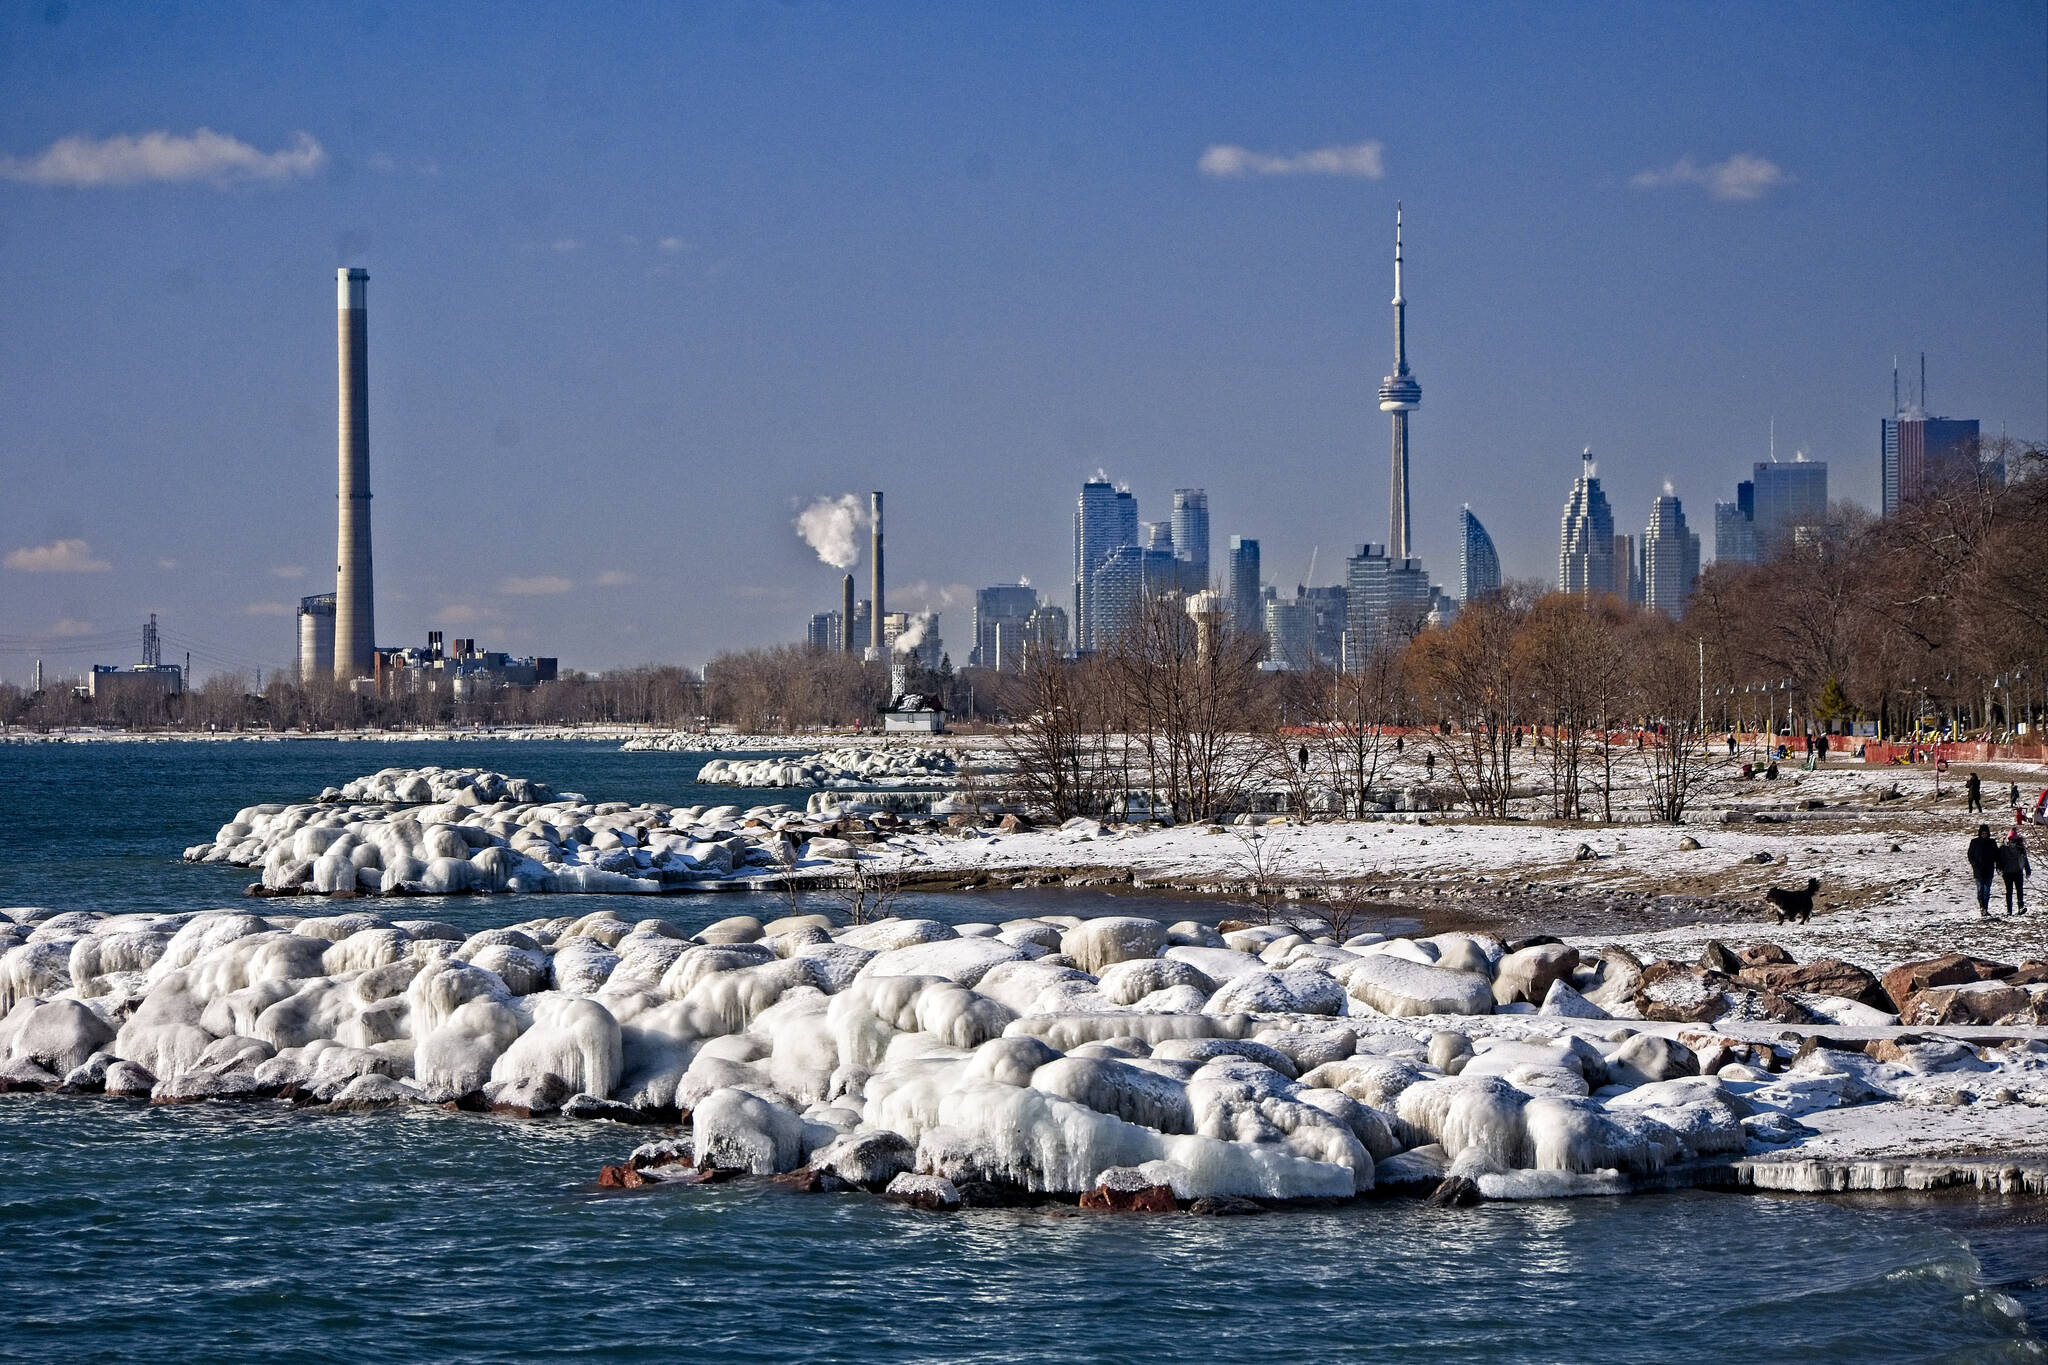 Toronto is about to get another 15 cm of snow